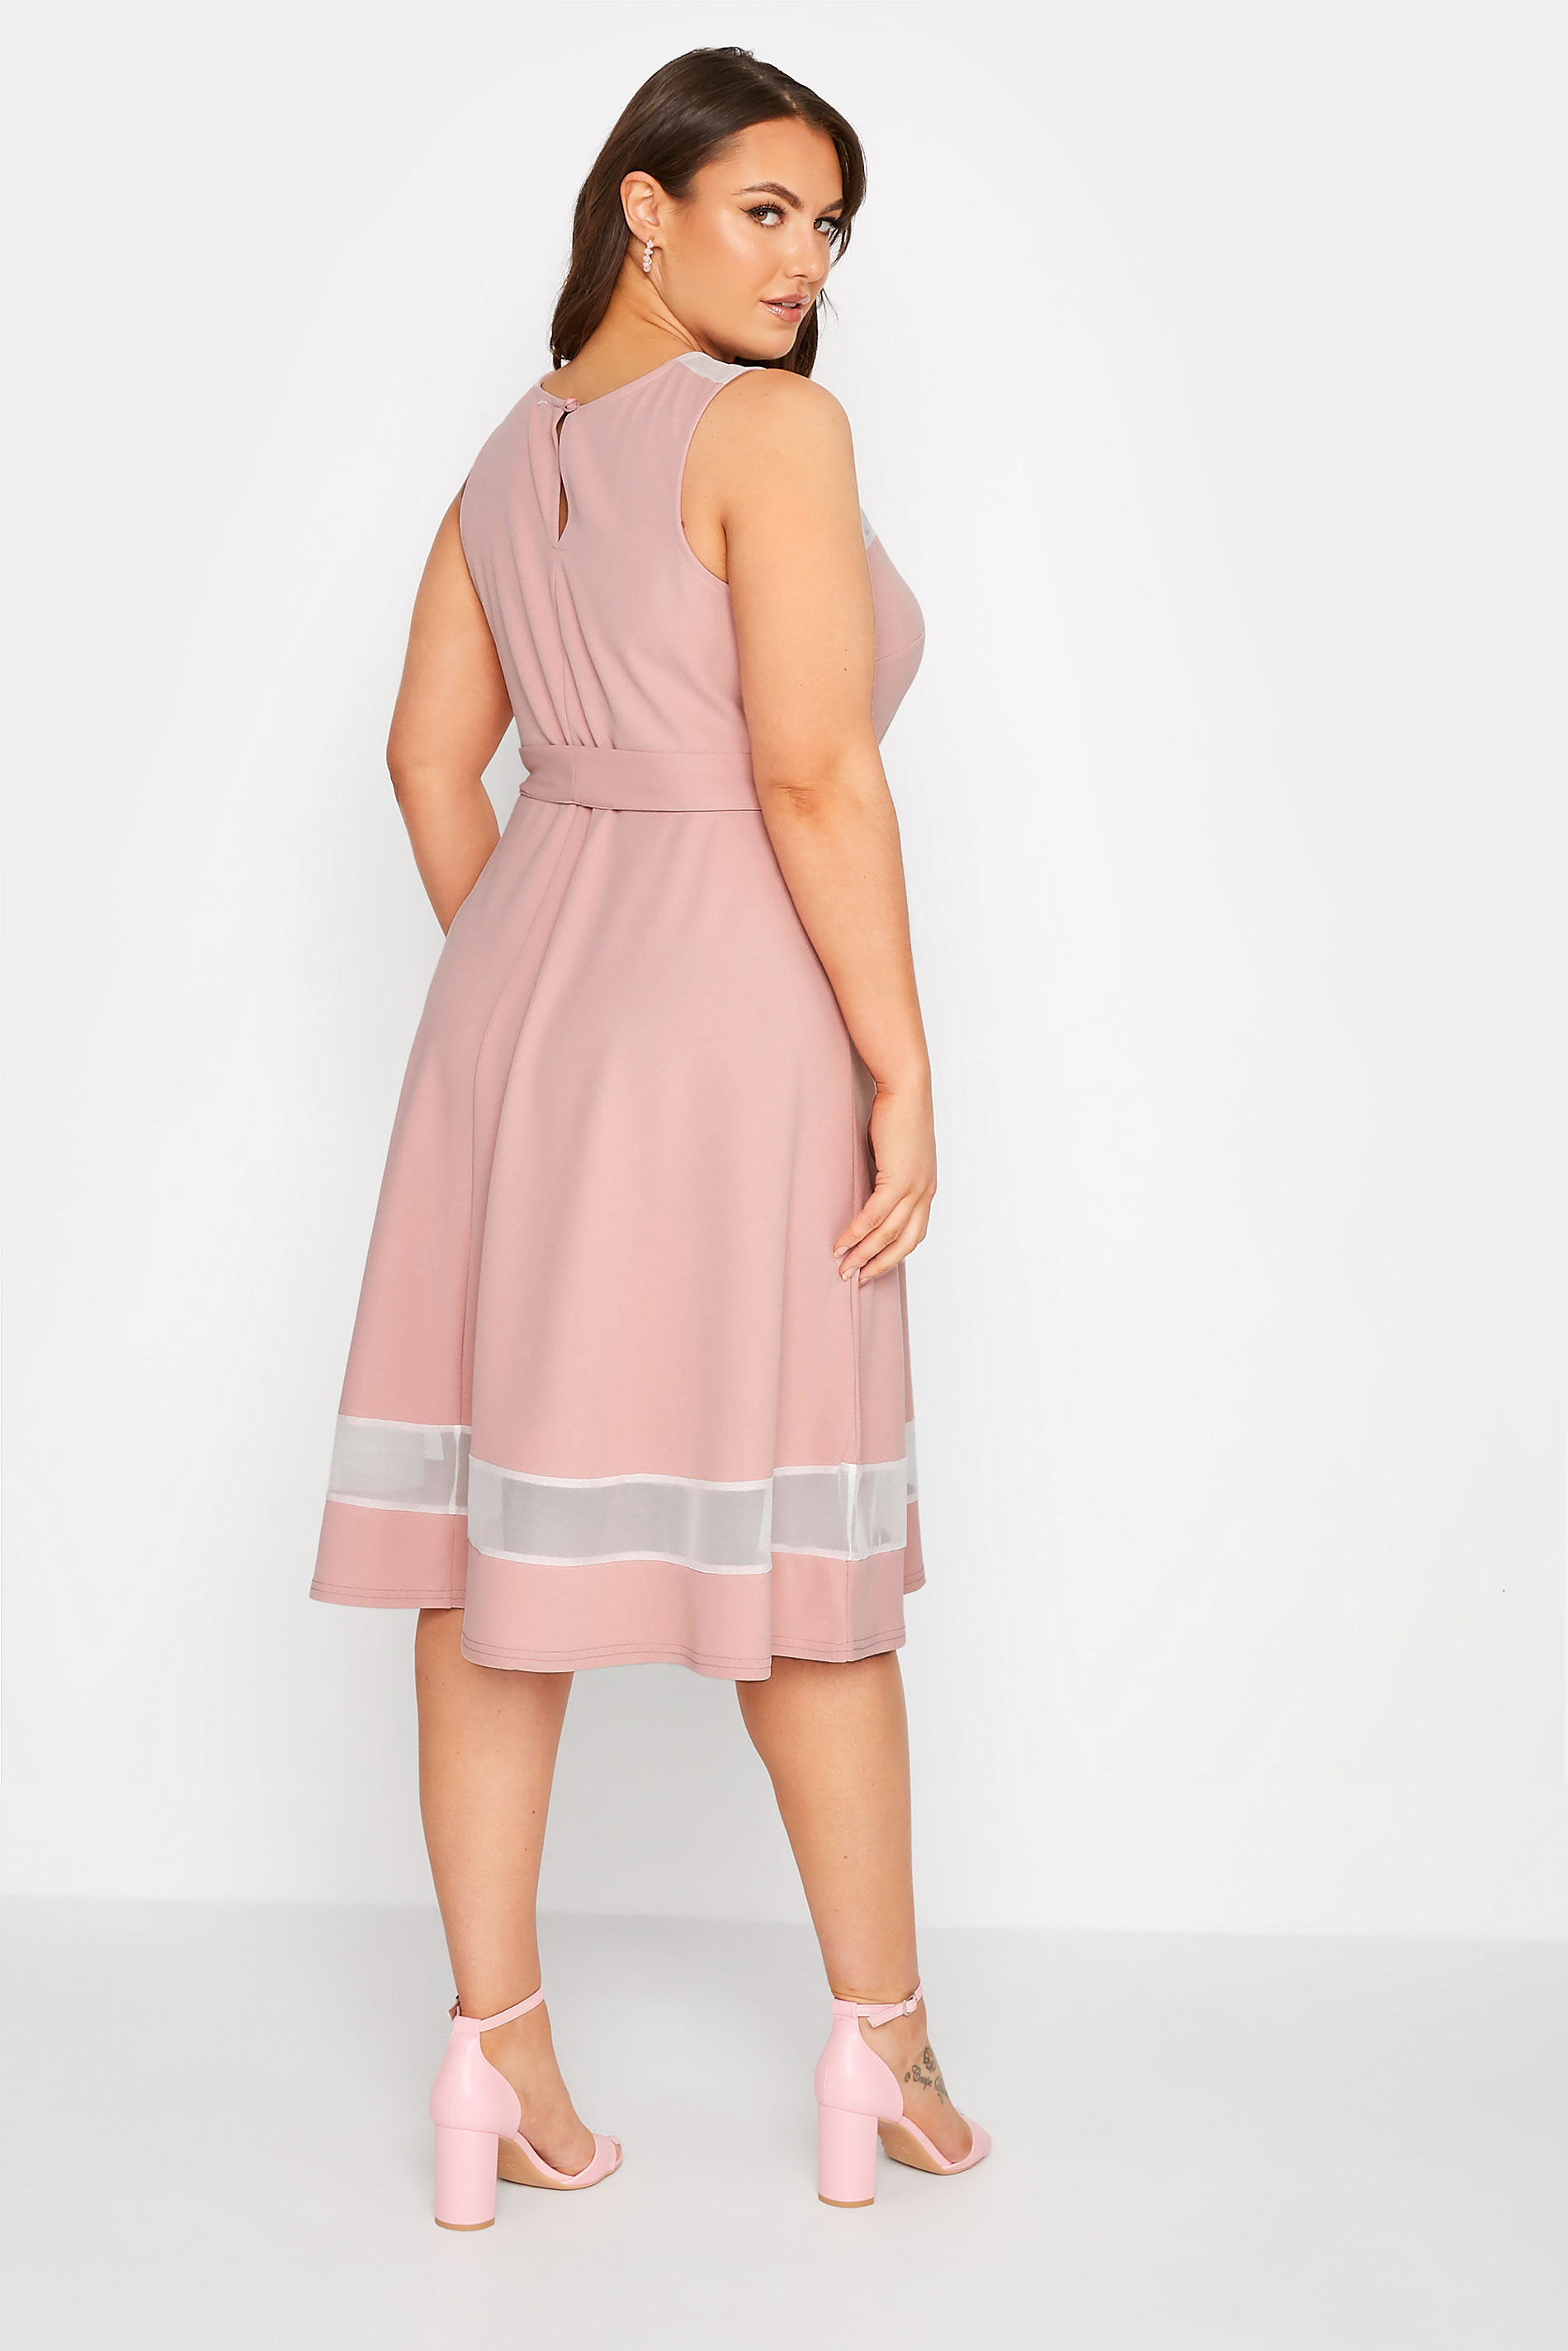 YOURS LONDON Plus Size Pink Mesh Panel Skater Dress | Yours Clothing 3